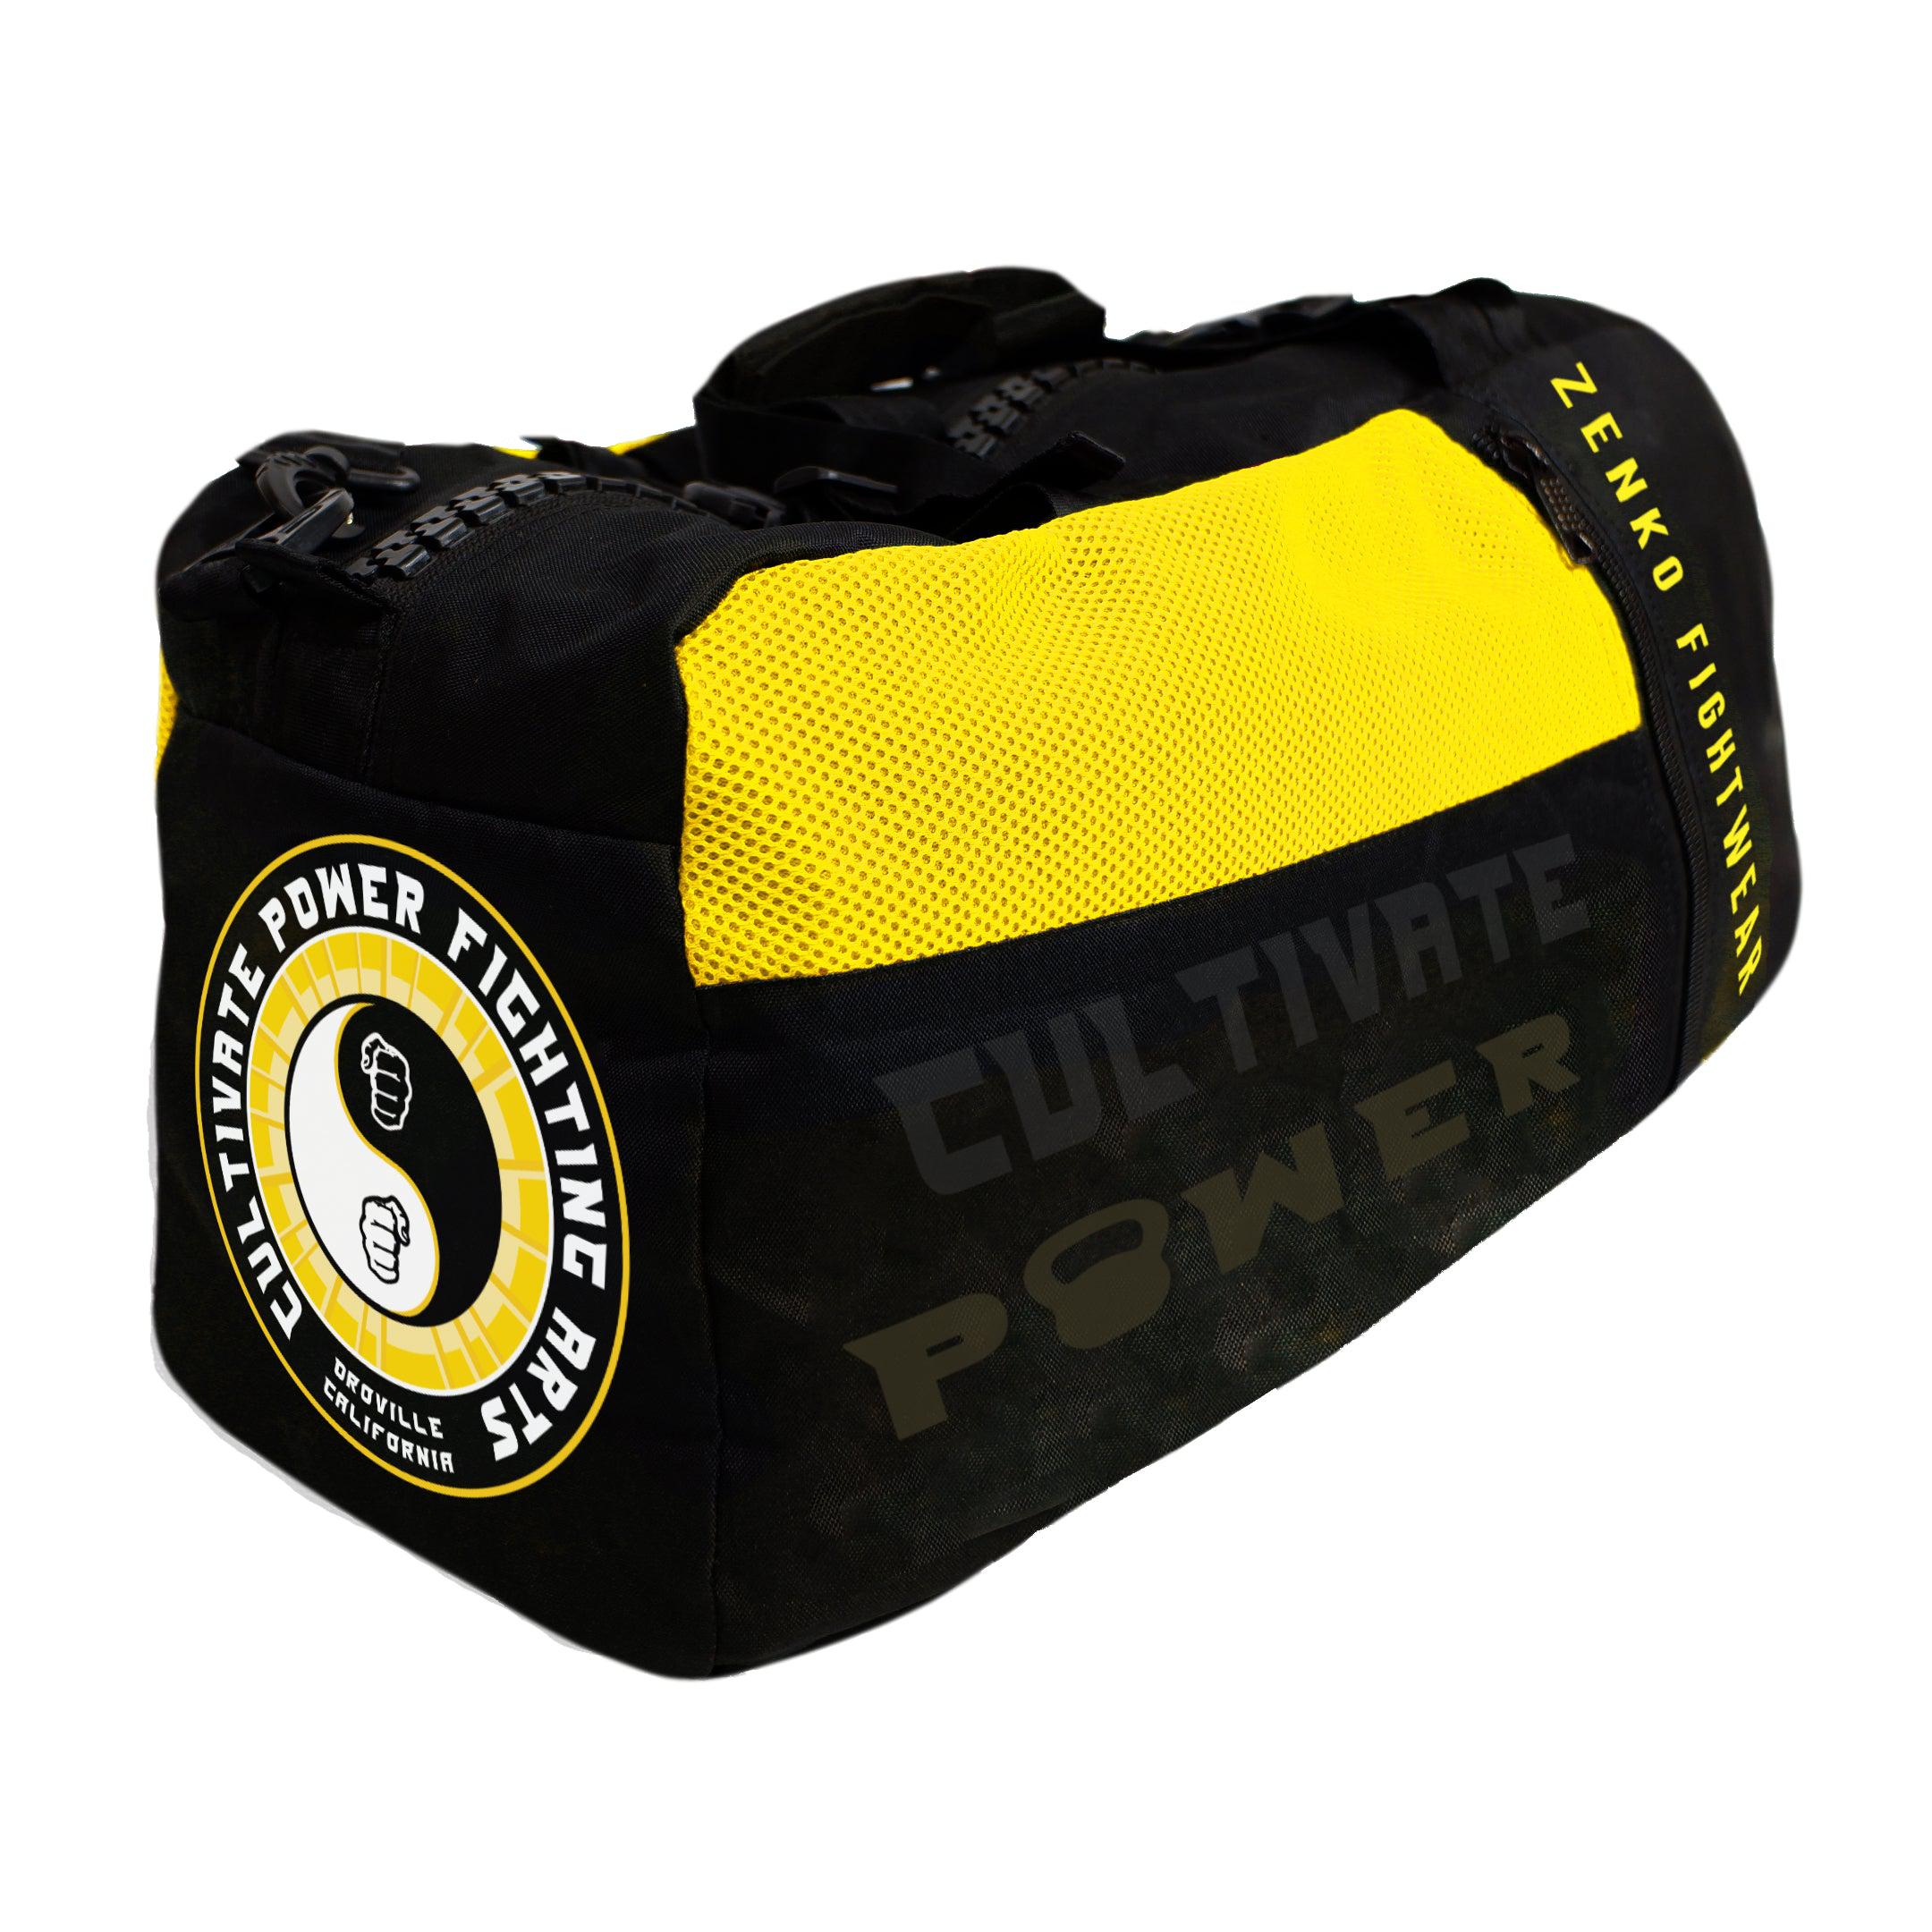 Cultivate Power Fighting Arts Gear Bag